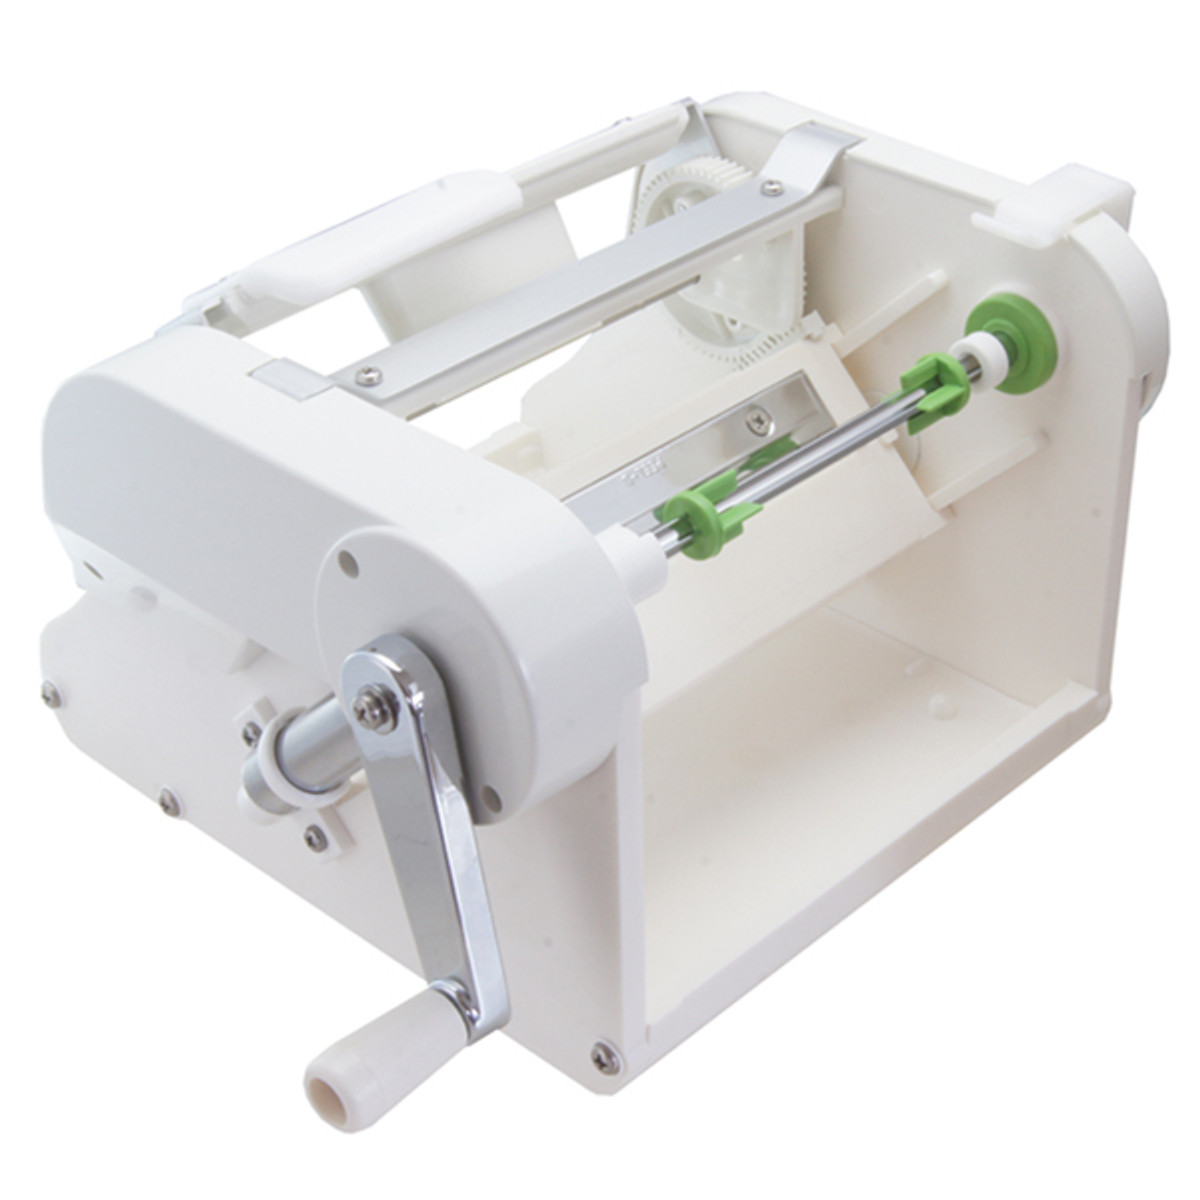  Chiba Kogyo CTM05 Tsumataro (Vegetable Cooker), Wig Peeler,  Cutter, Main Unit: PSABS Aluminum, Other Cutlery, Stainless Steel, Made in  Japan : Home & Kitchen